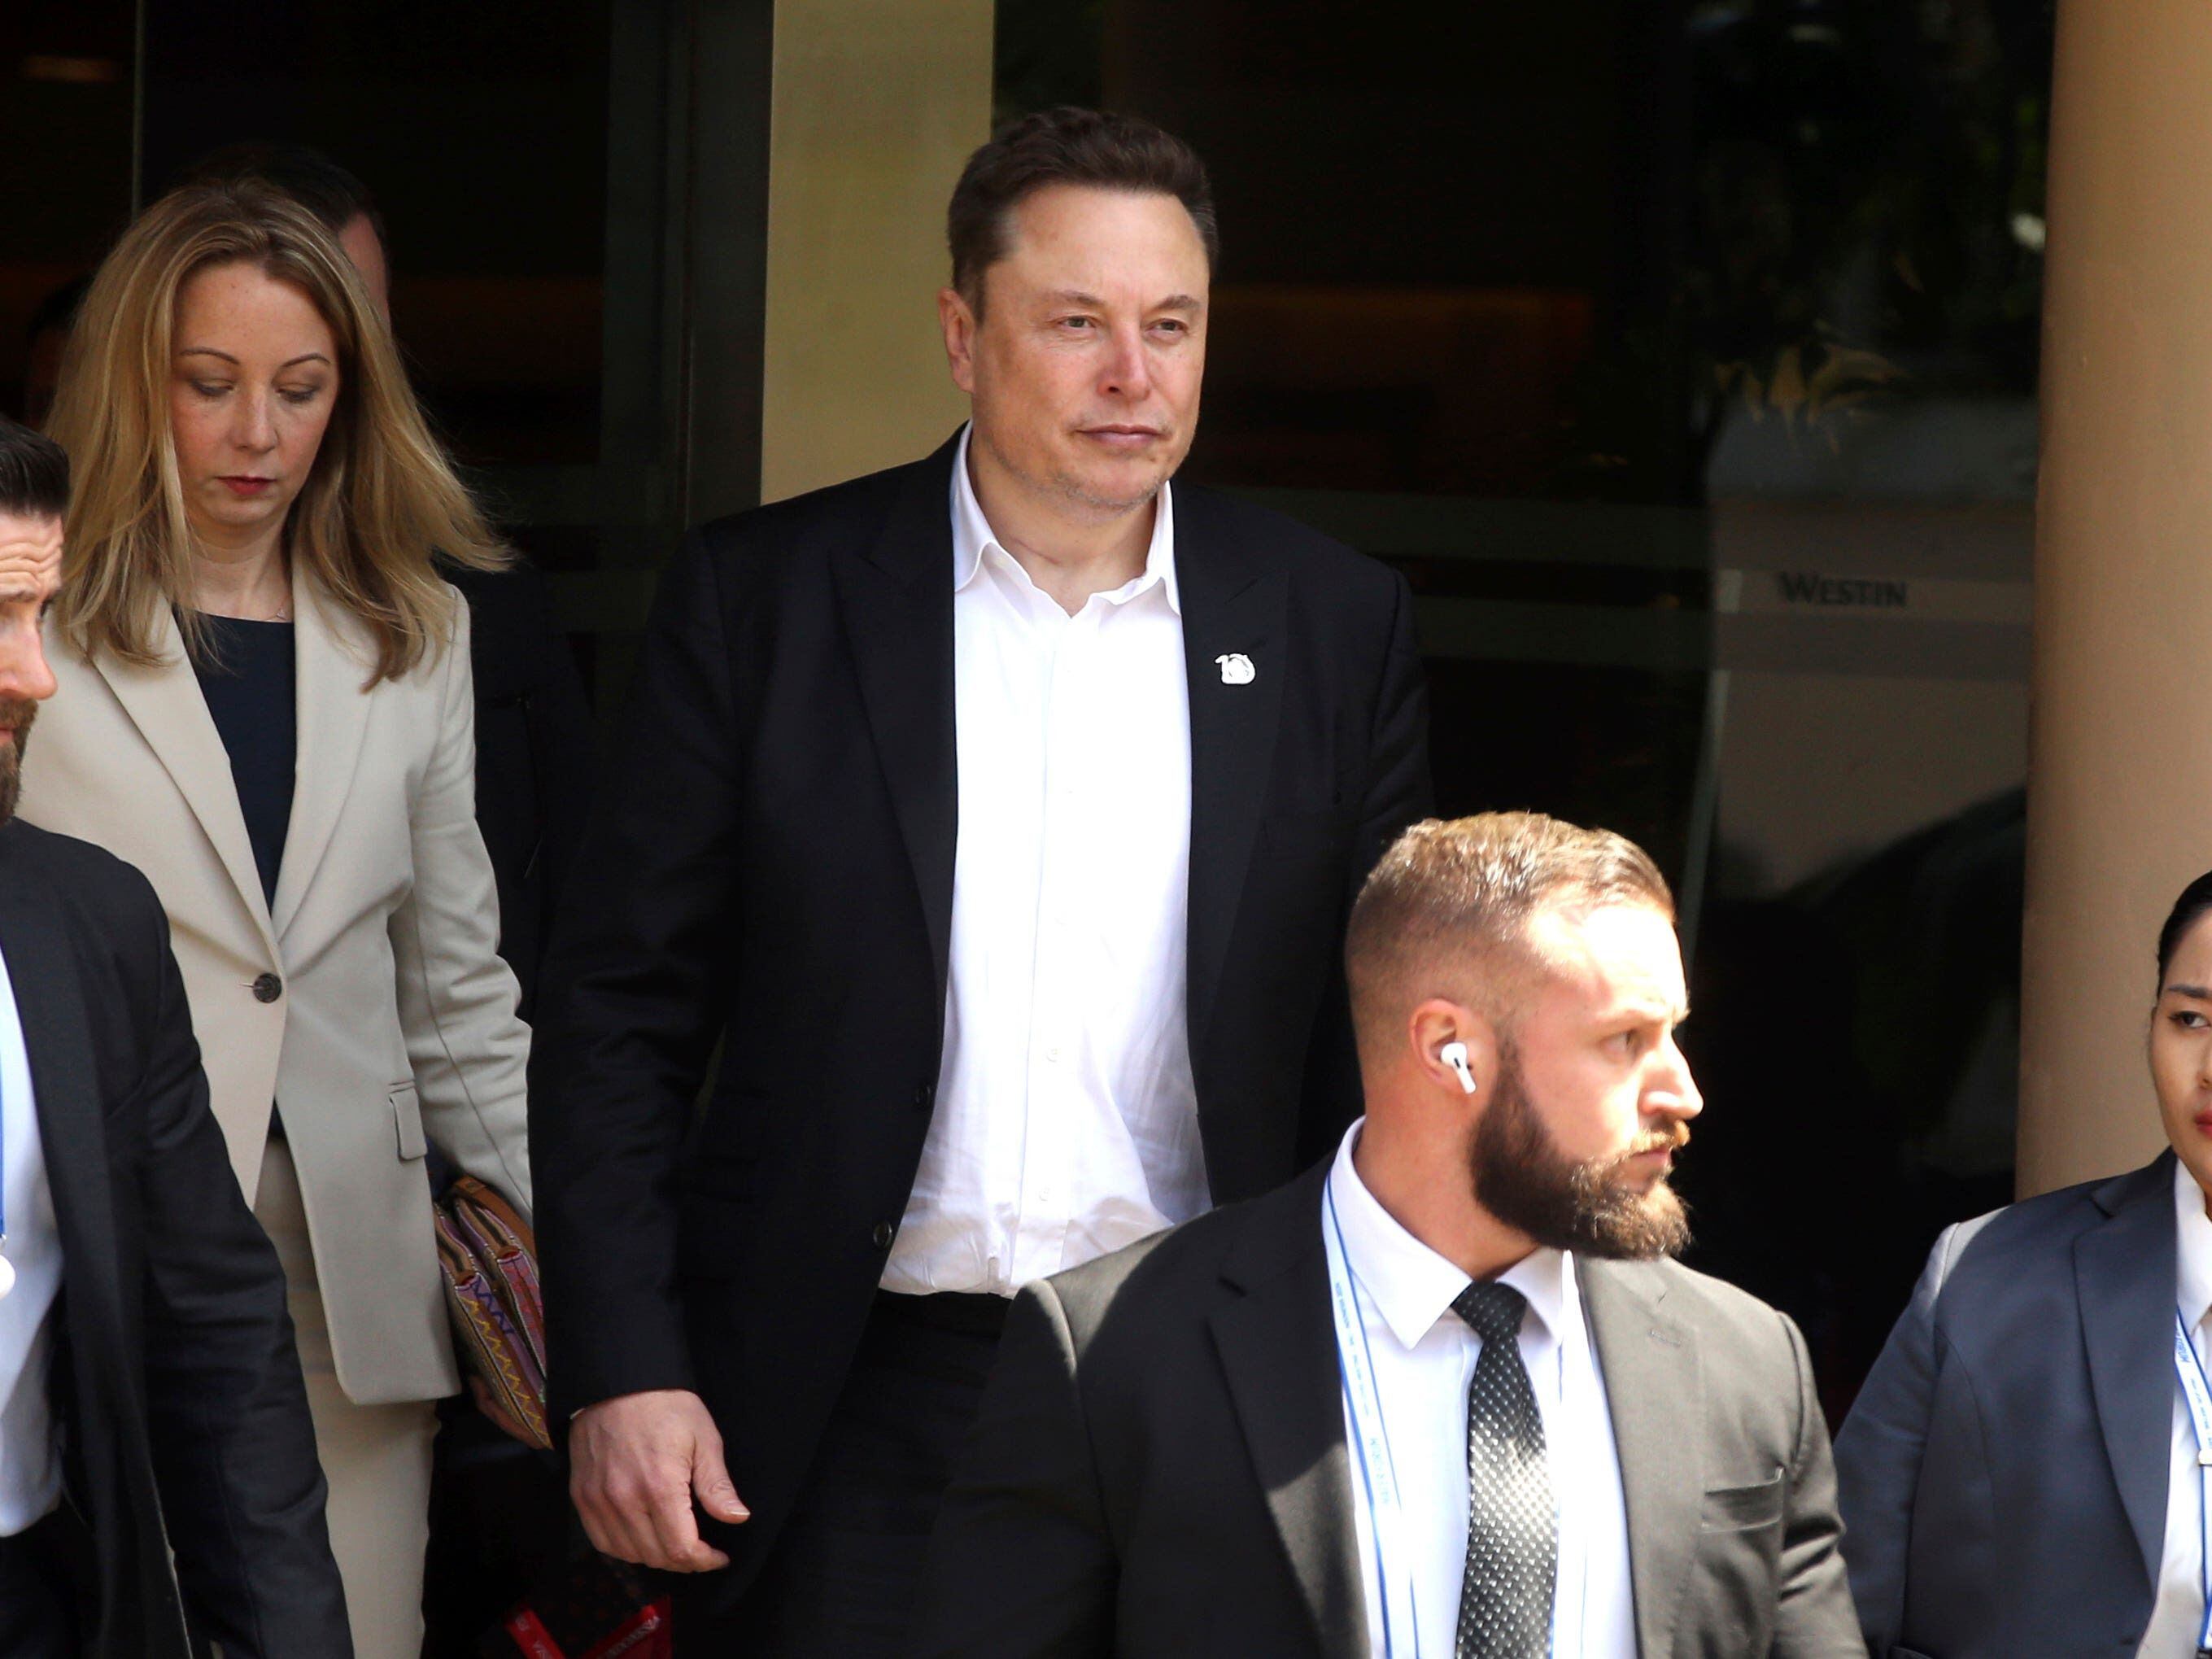 Tesla shareholders ask investors to vote against Musk’s compensation package